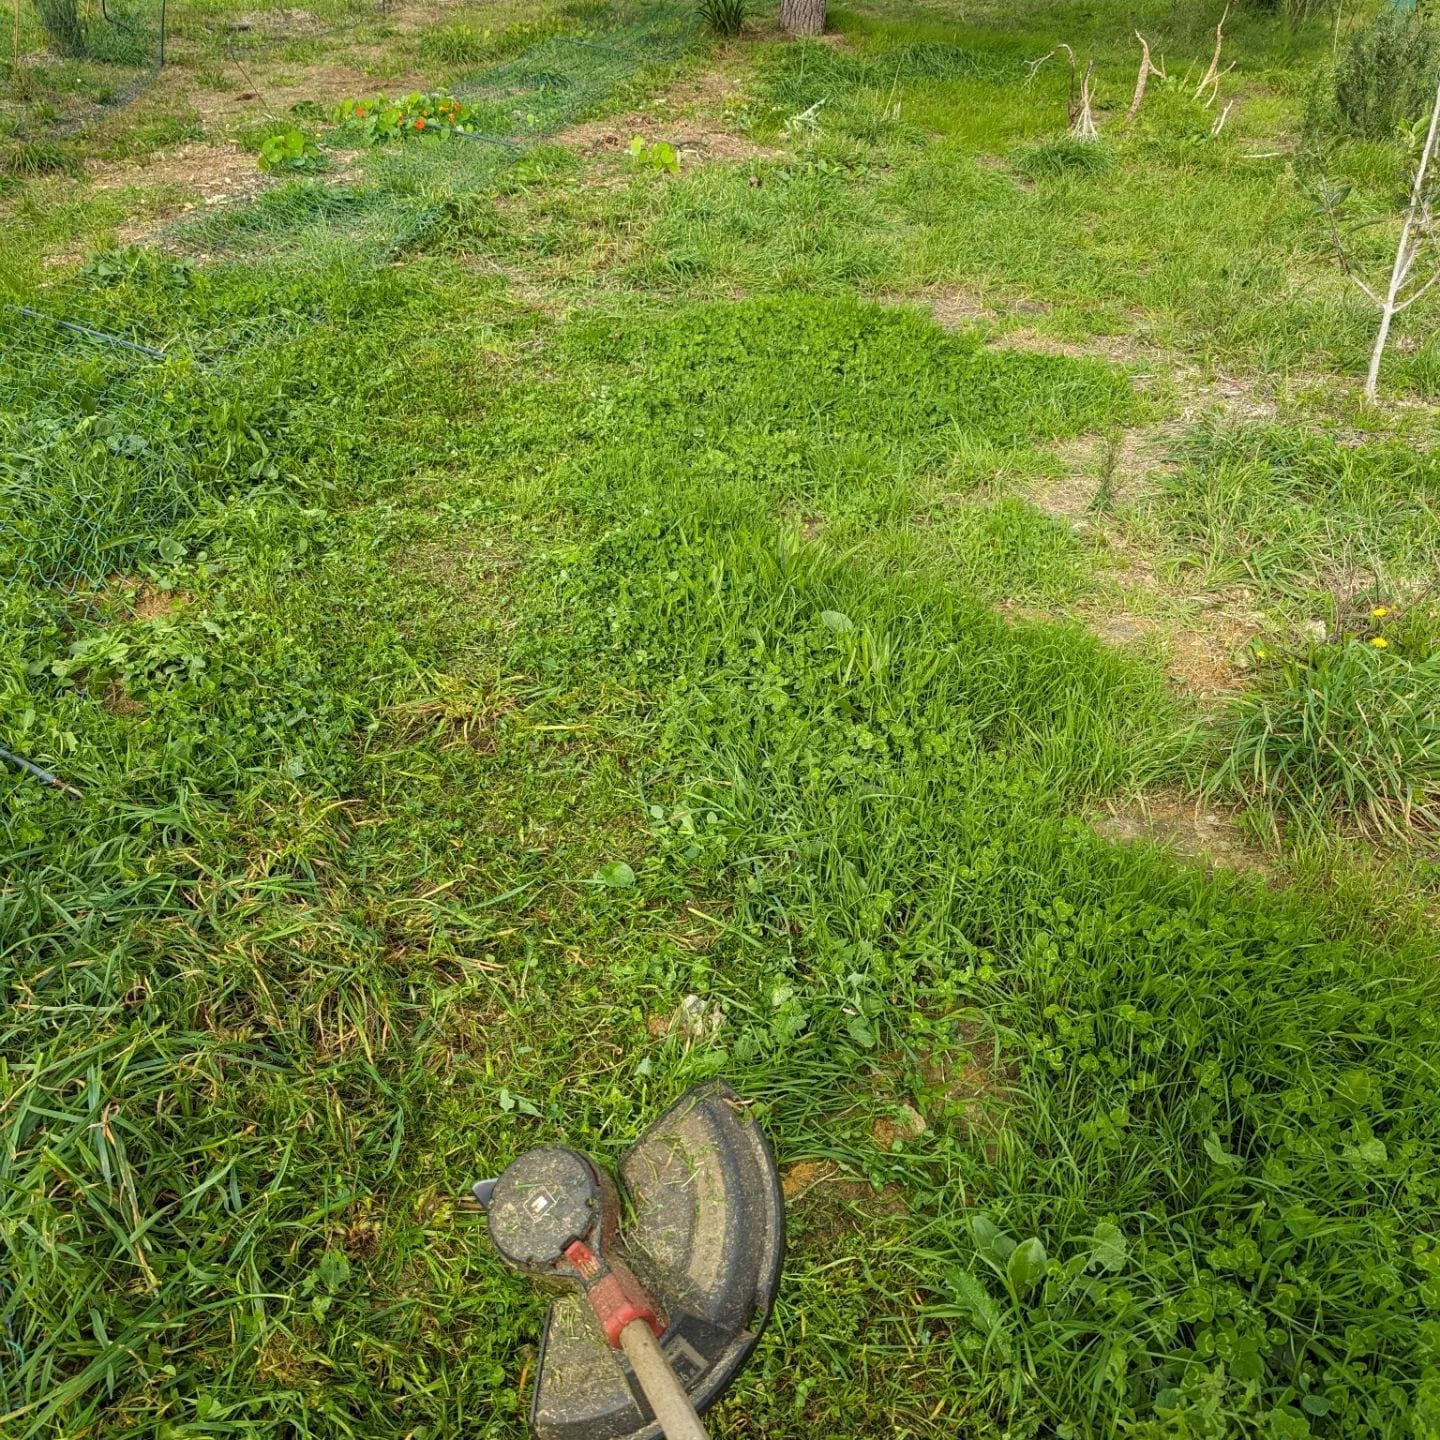 Mowing under the electric fence lines in zone 2